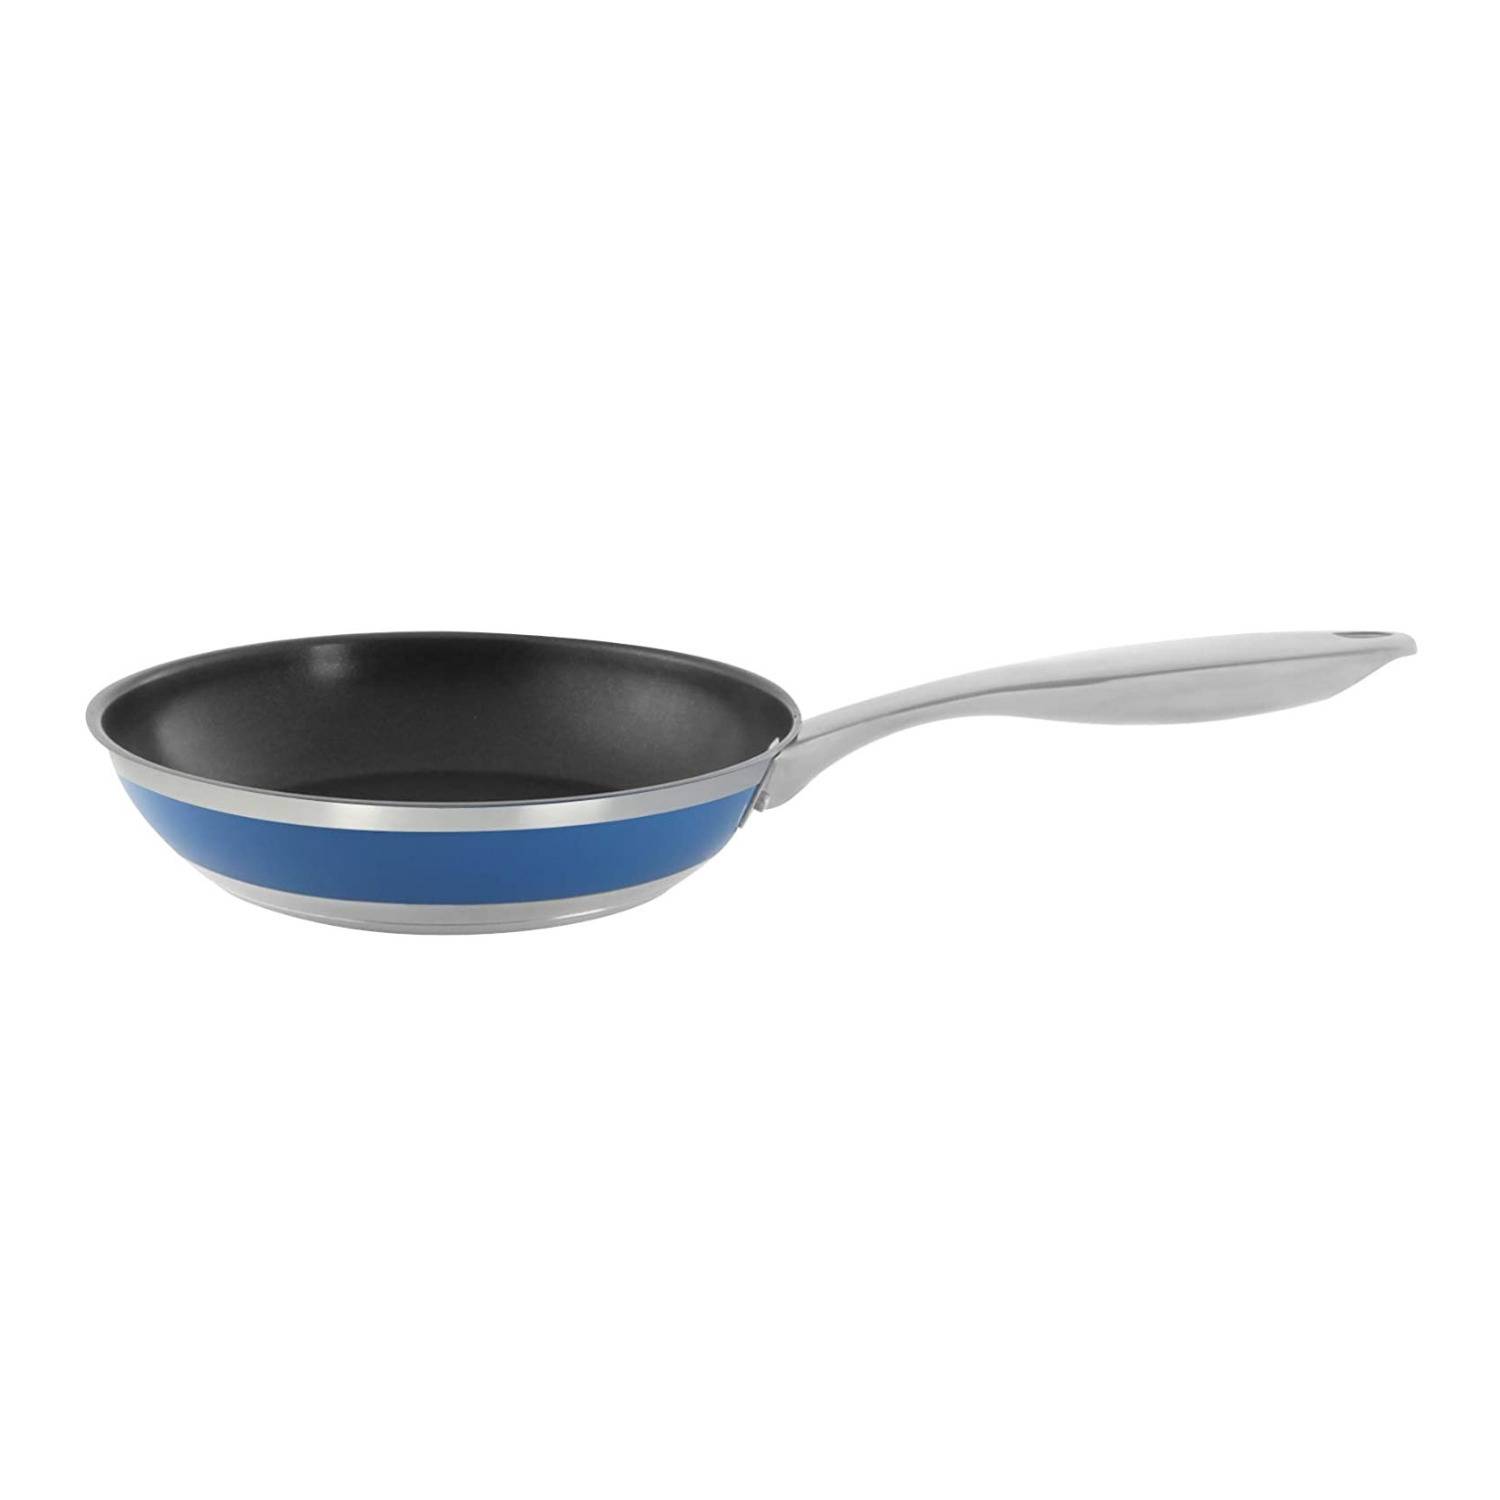 Chantal 8-Inch Nonstick Fry Pan with Blue Cove Band